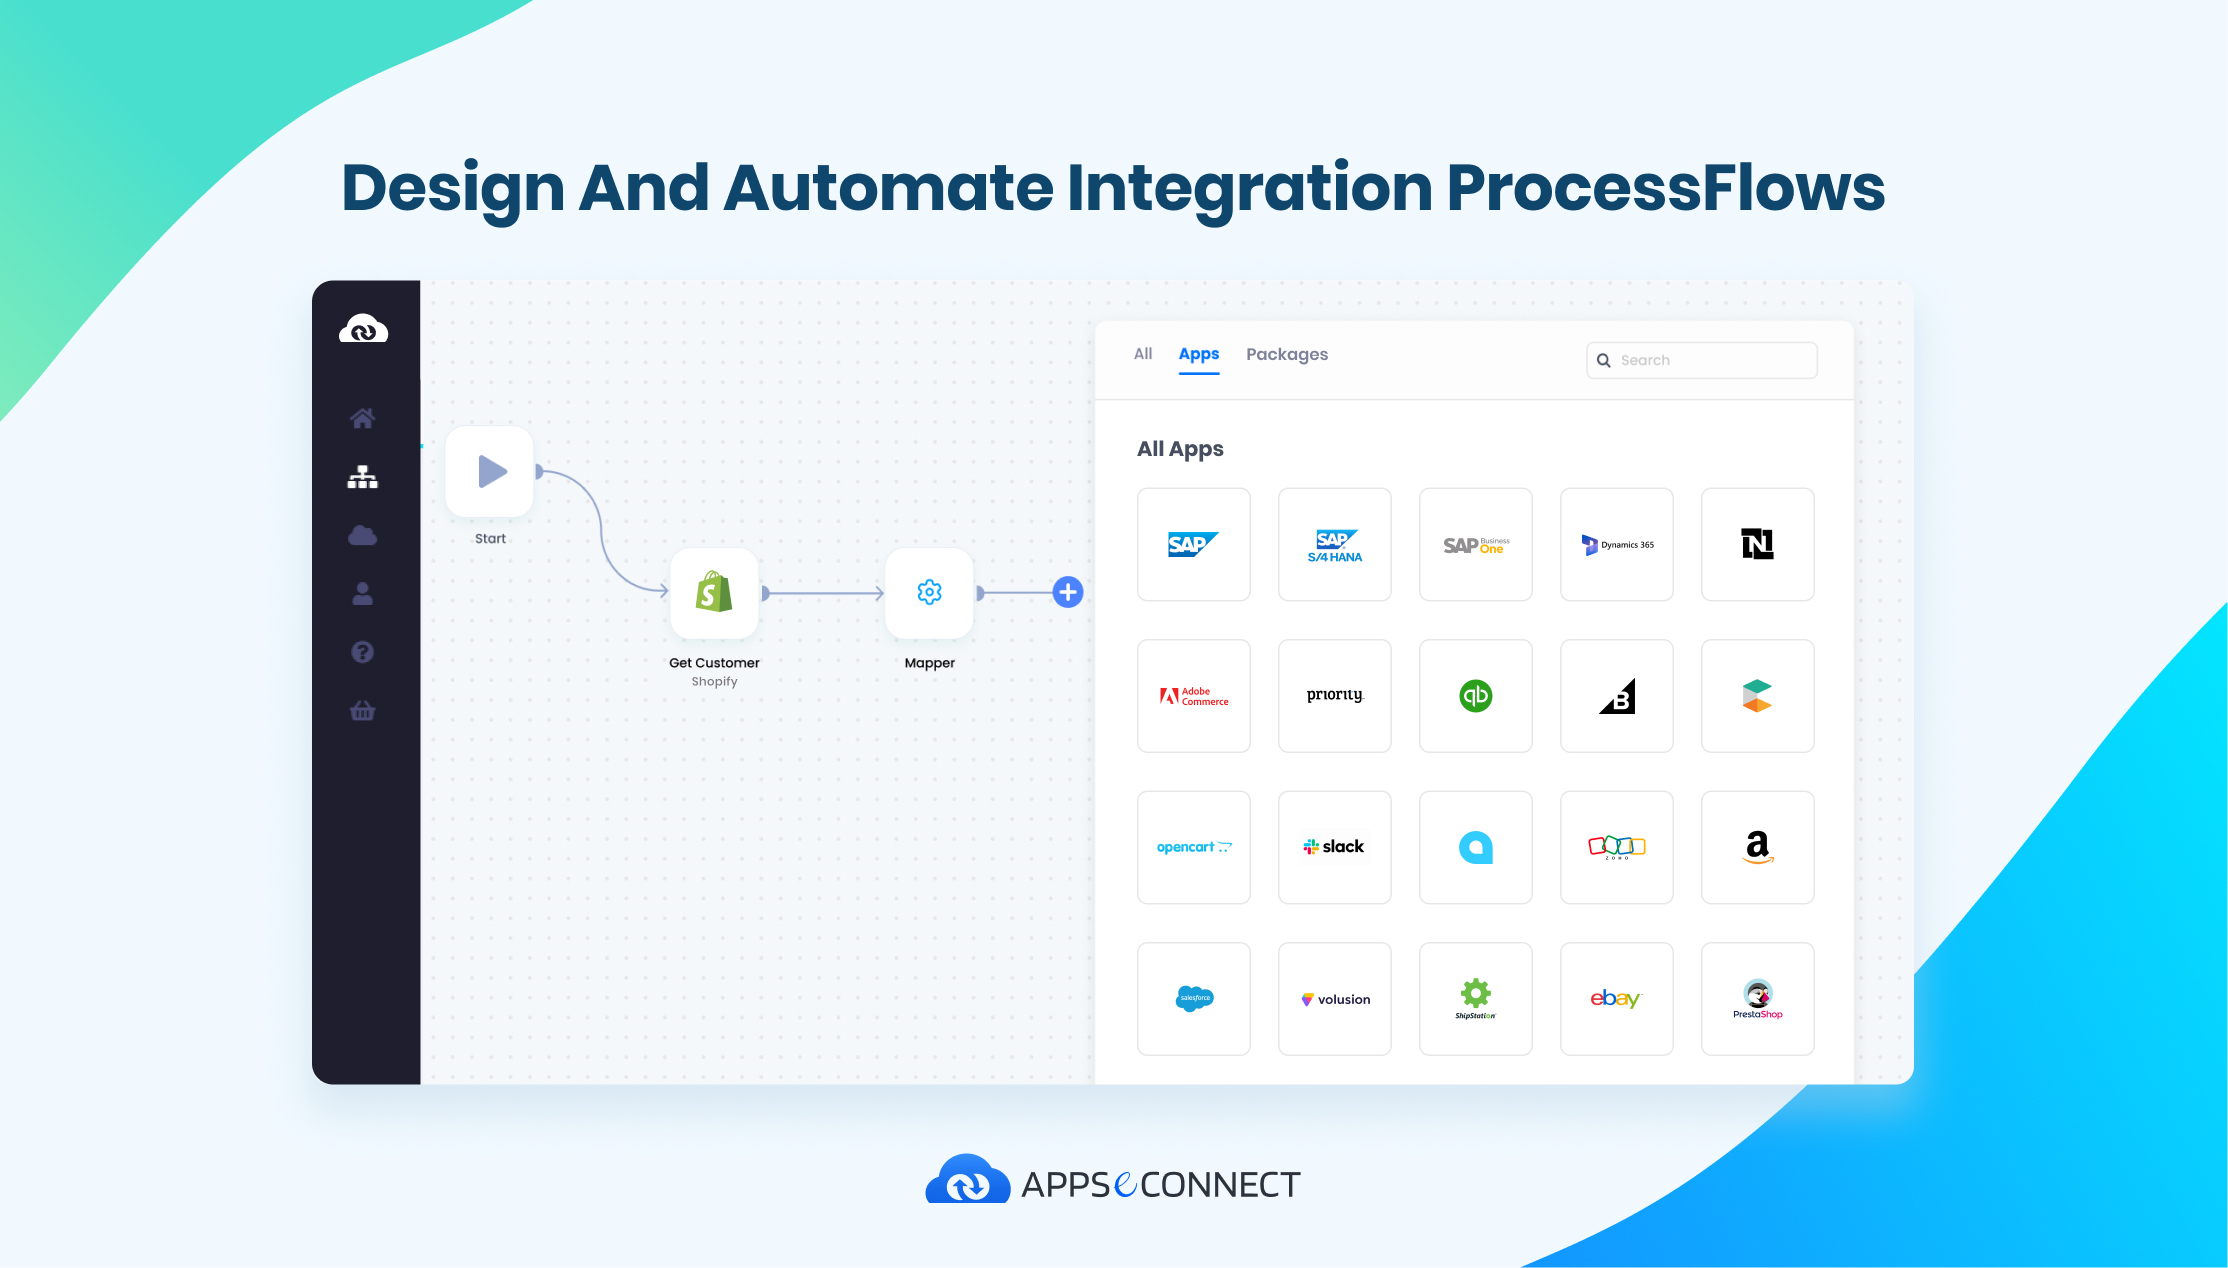 Processflow, a low-code, easy and visual interface - ProcessFlow, a drag-and-drop designer, allows quick implementation and integration of two or more applications, generate notifications, and deploy the entire business process at one go.